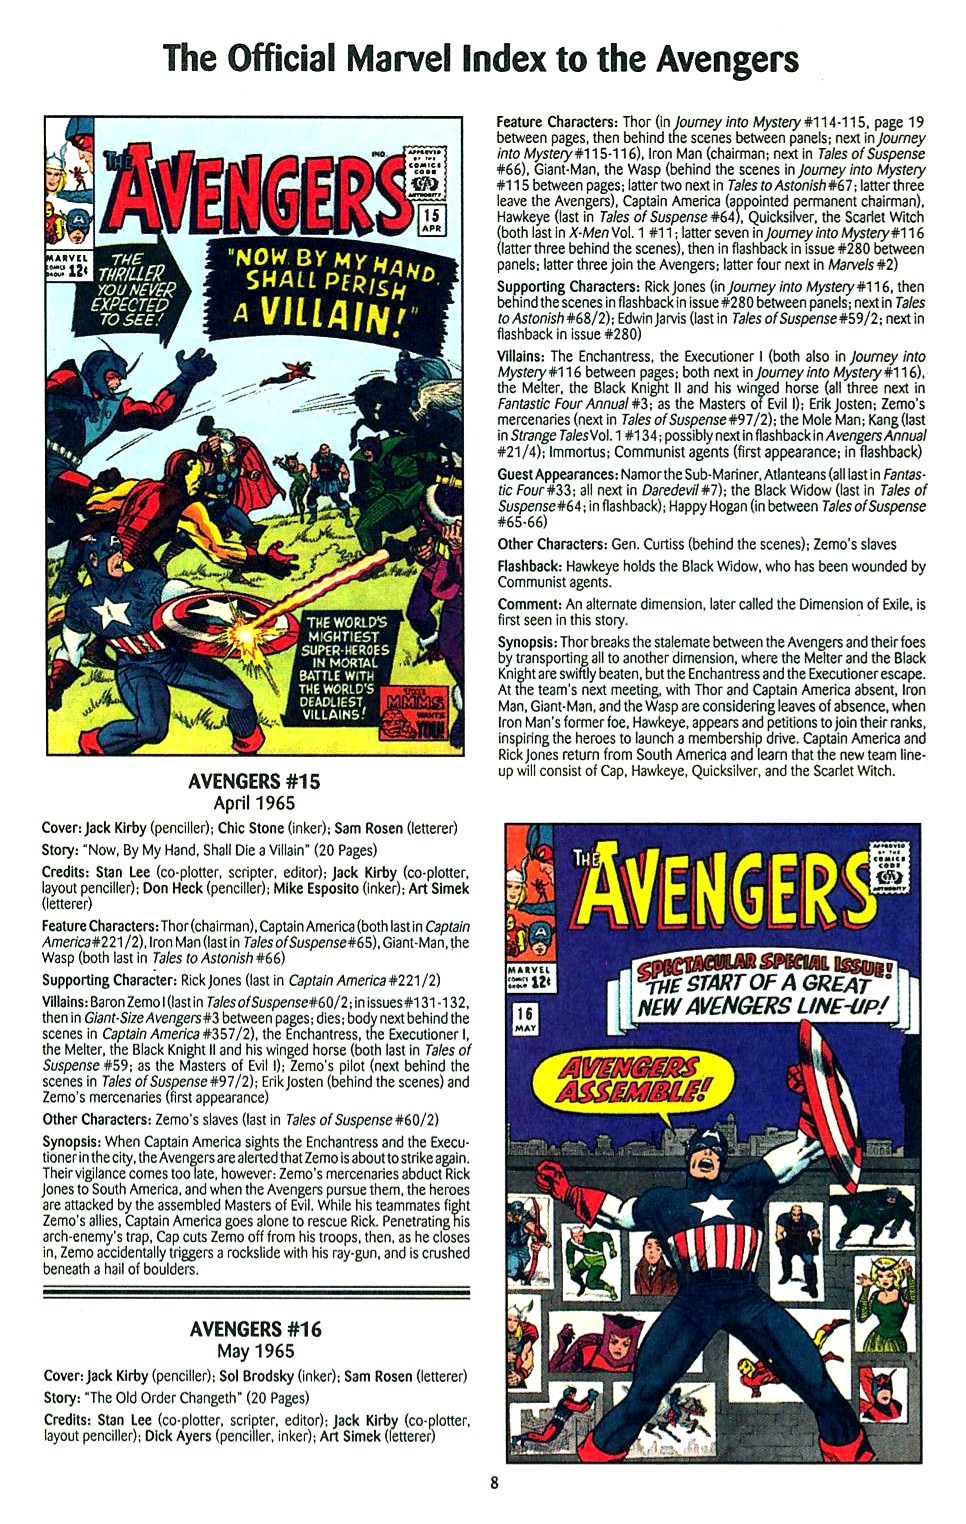 Read online The Official Marvel Index to the Avengers comic -  Issue #1 - 10